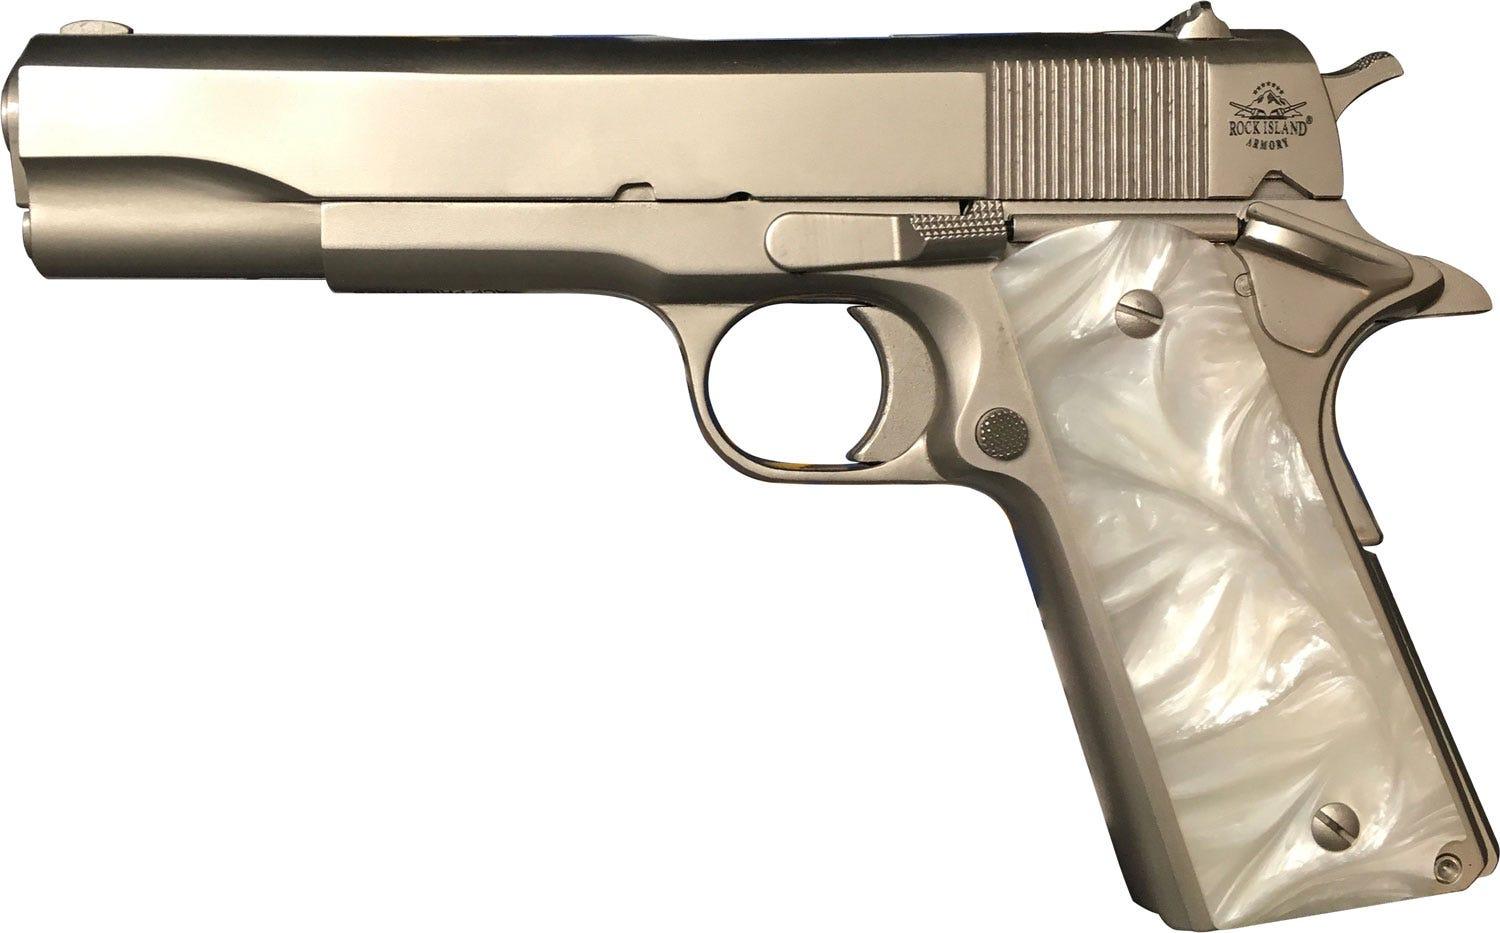 Rock Island Armory M1911-A1 GI Nickel .45 ACP 5" Barrel 8-Rounds Mother of Pearl Grips - $555.98